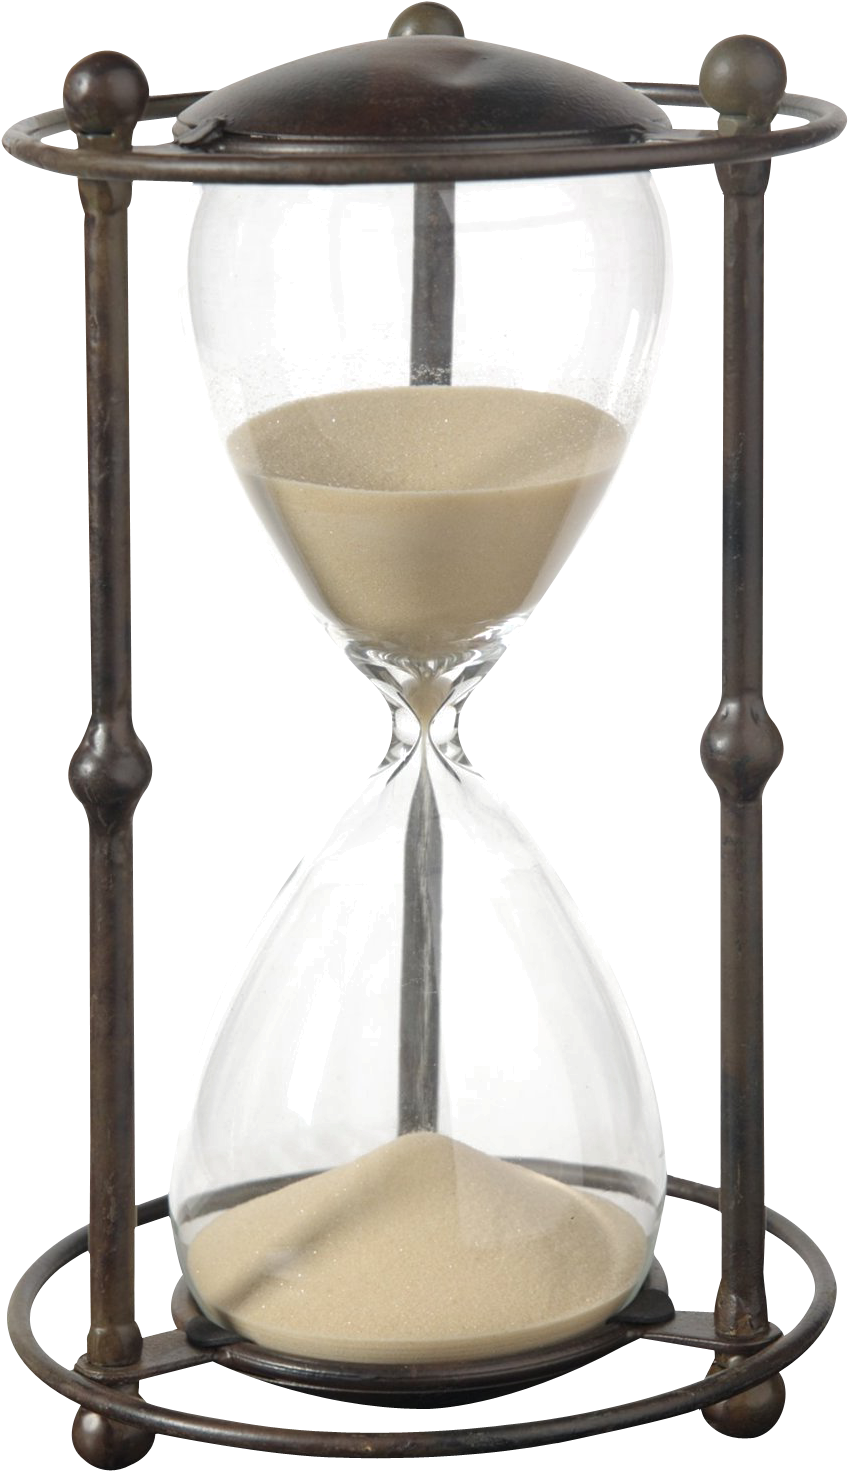 A Close Up Of A Hourglass